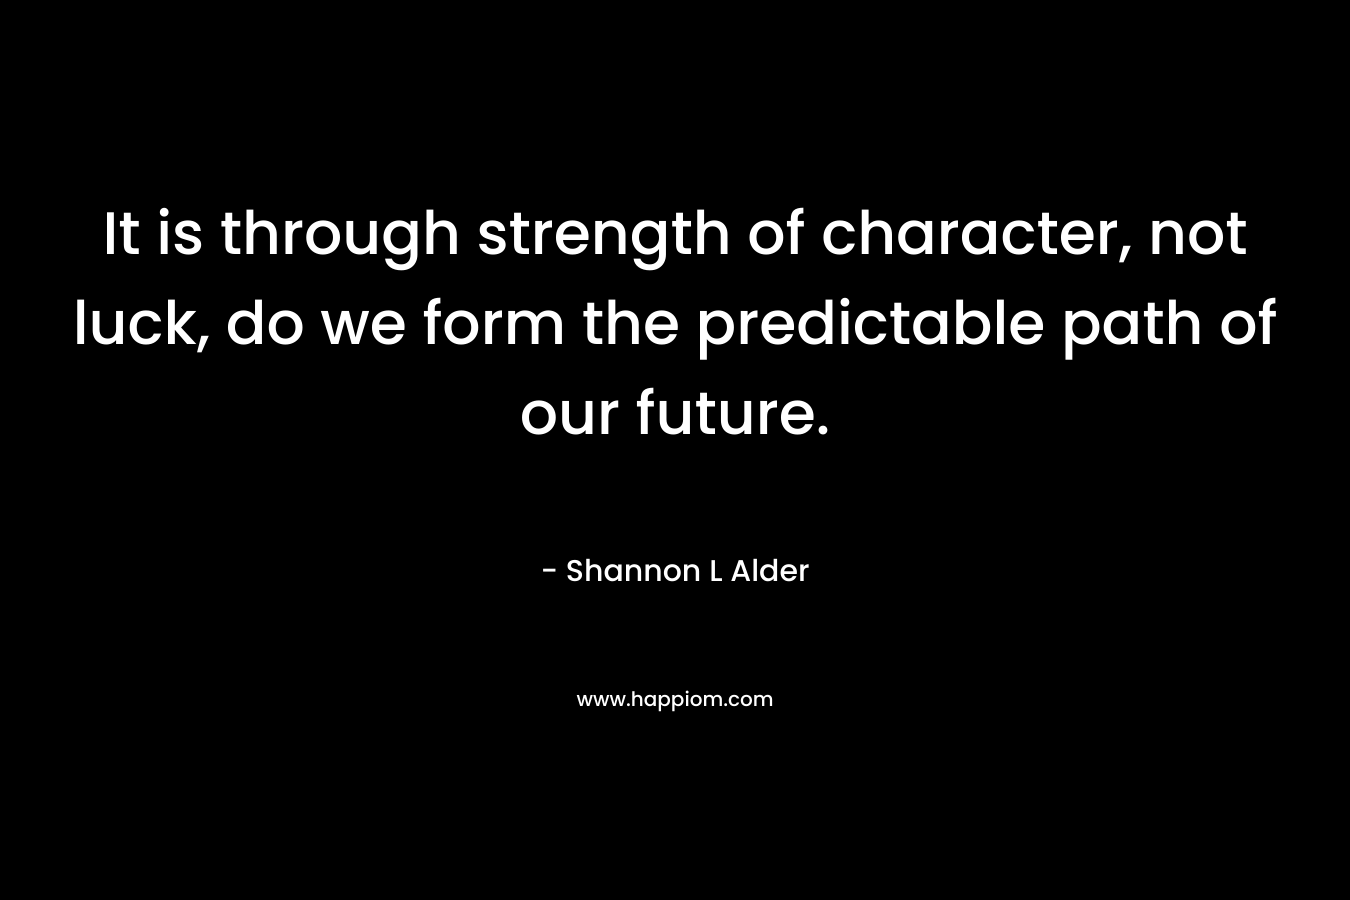 It is through strength of character, not luck, do we form the predictable path of our future.